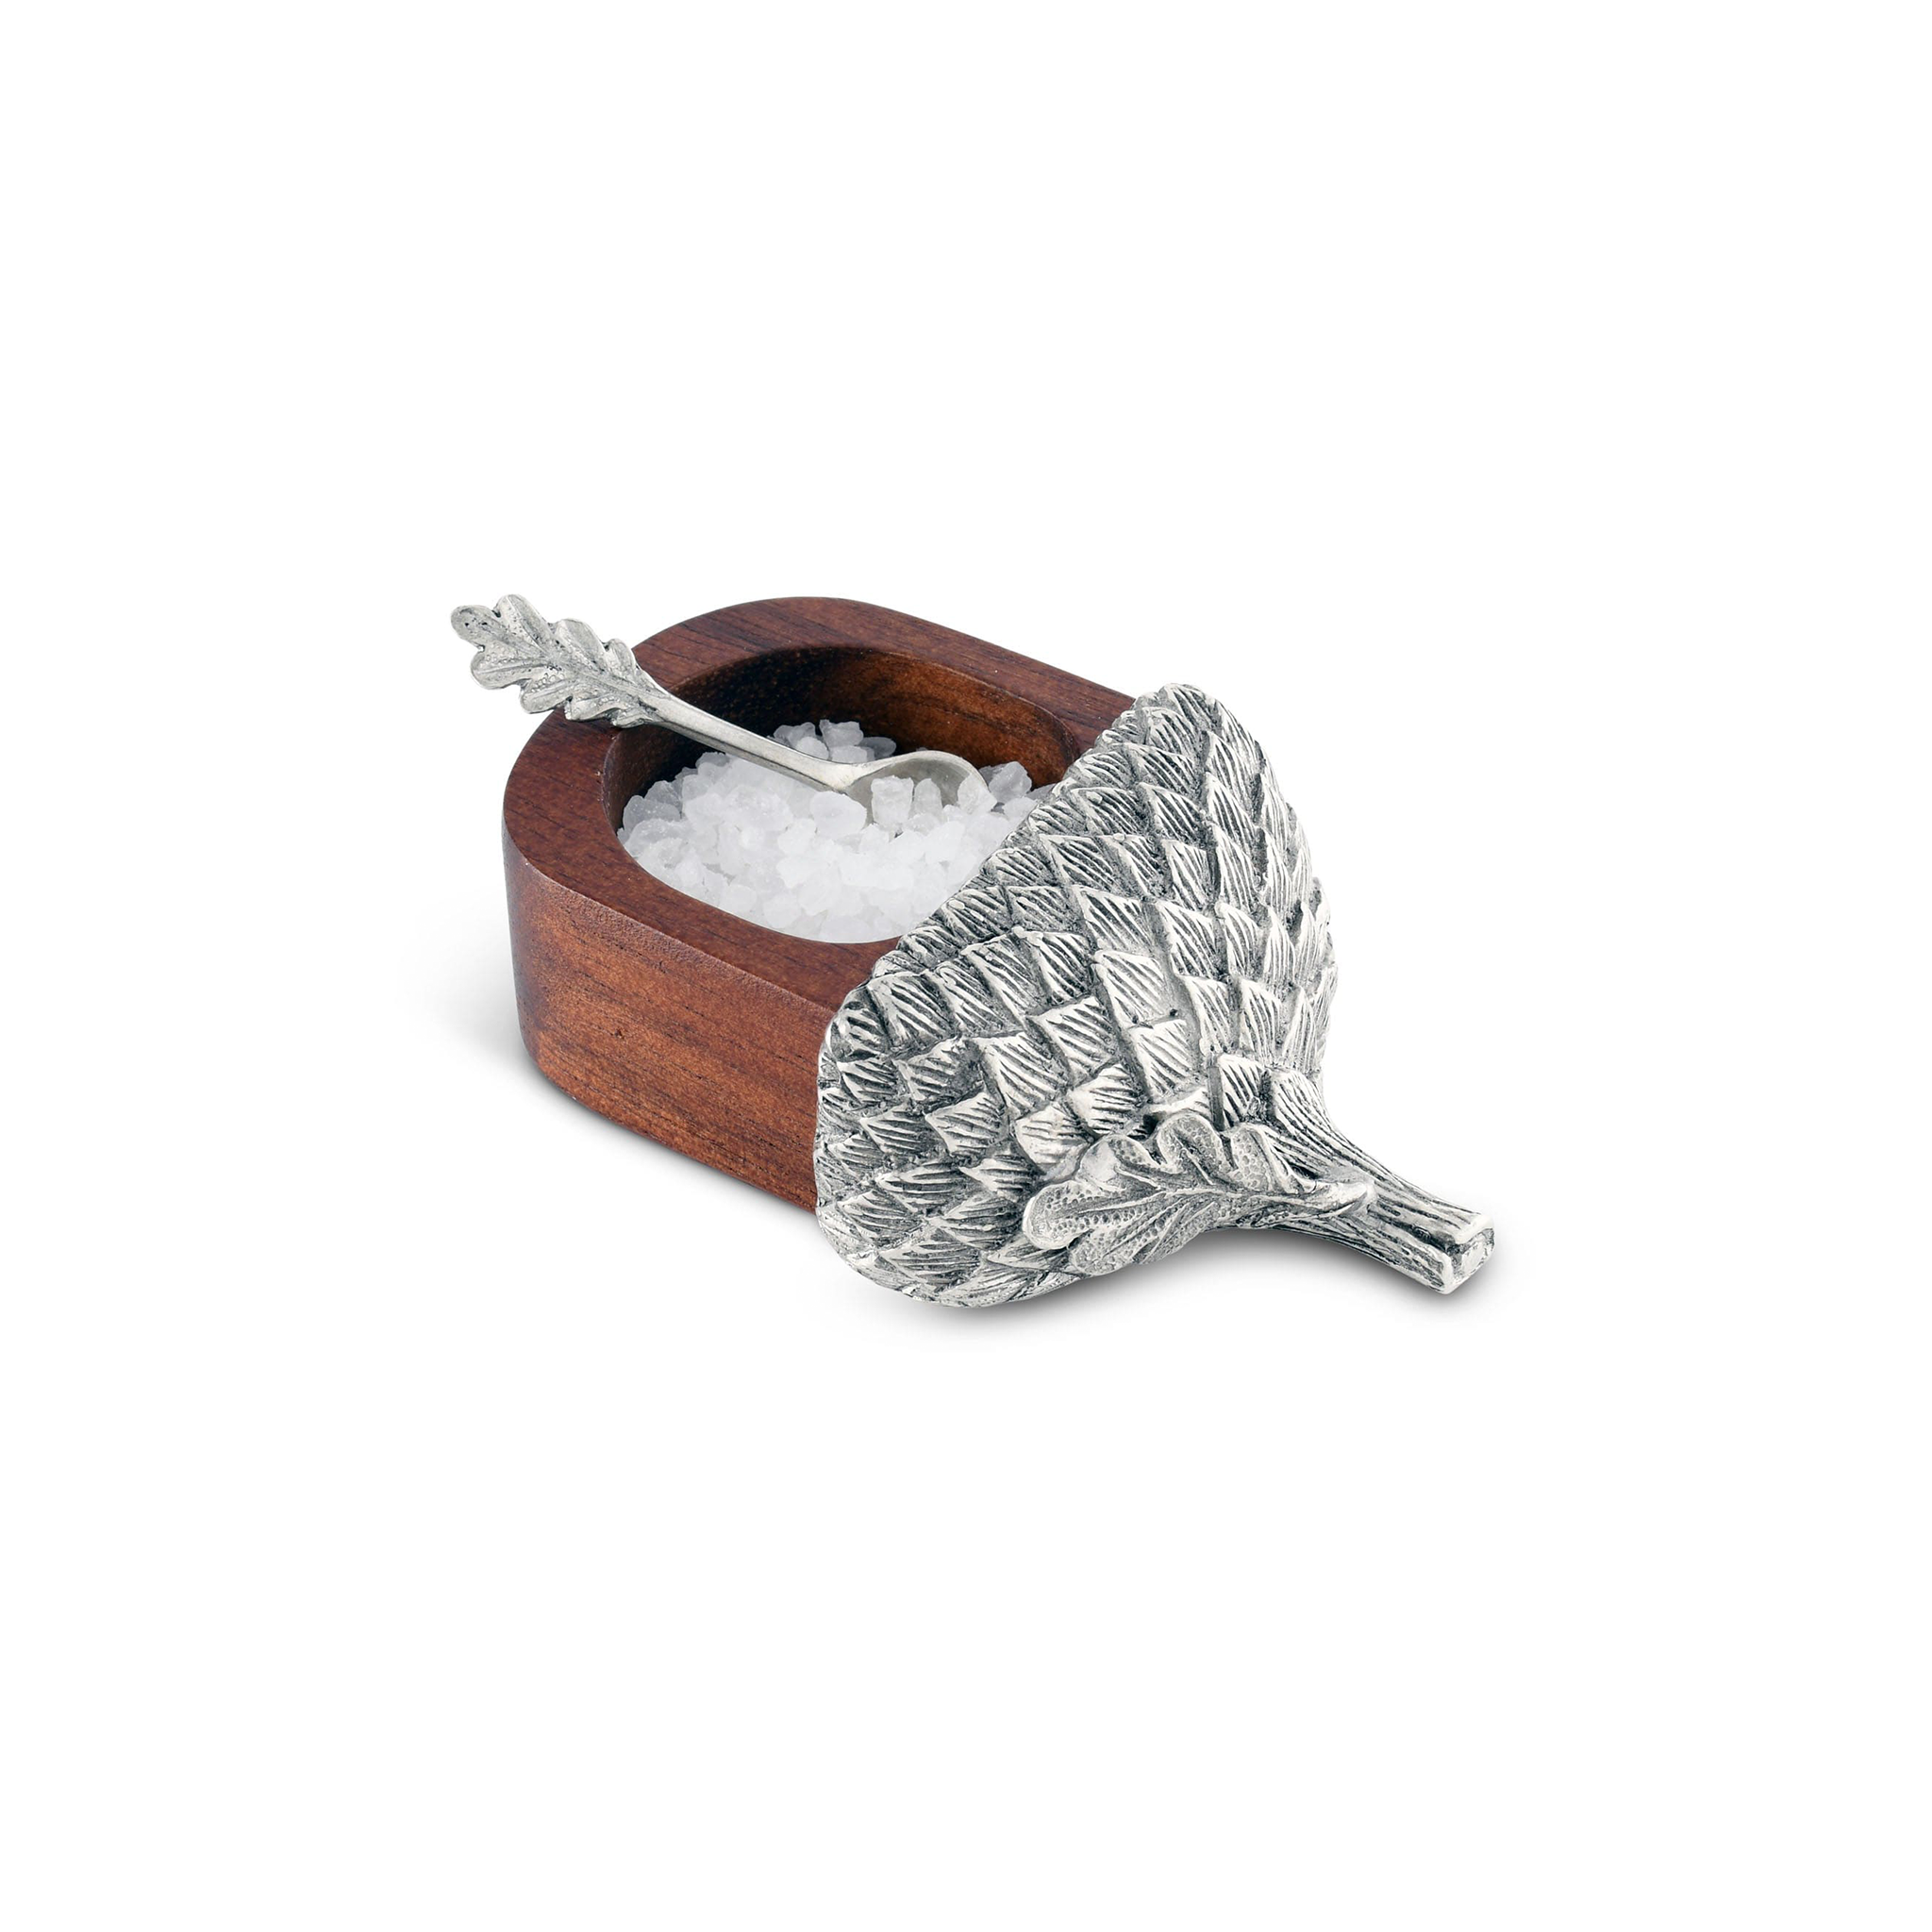 a small wooden acorn salt cellar with salt in it with a pewter cap on it on a white background